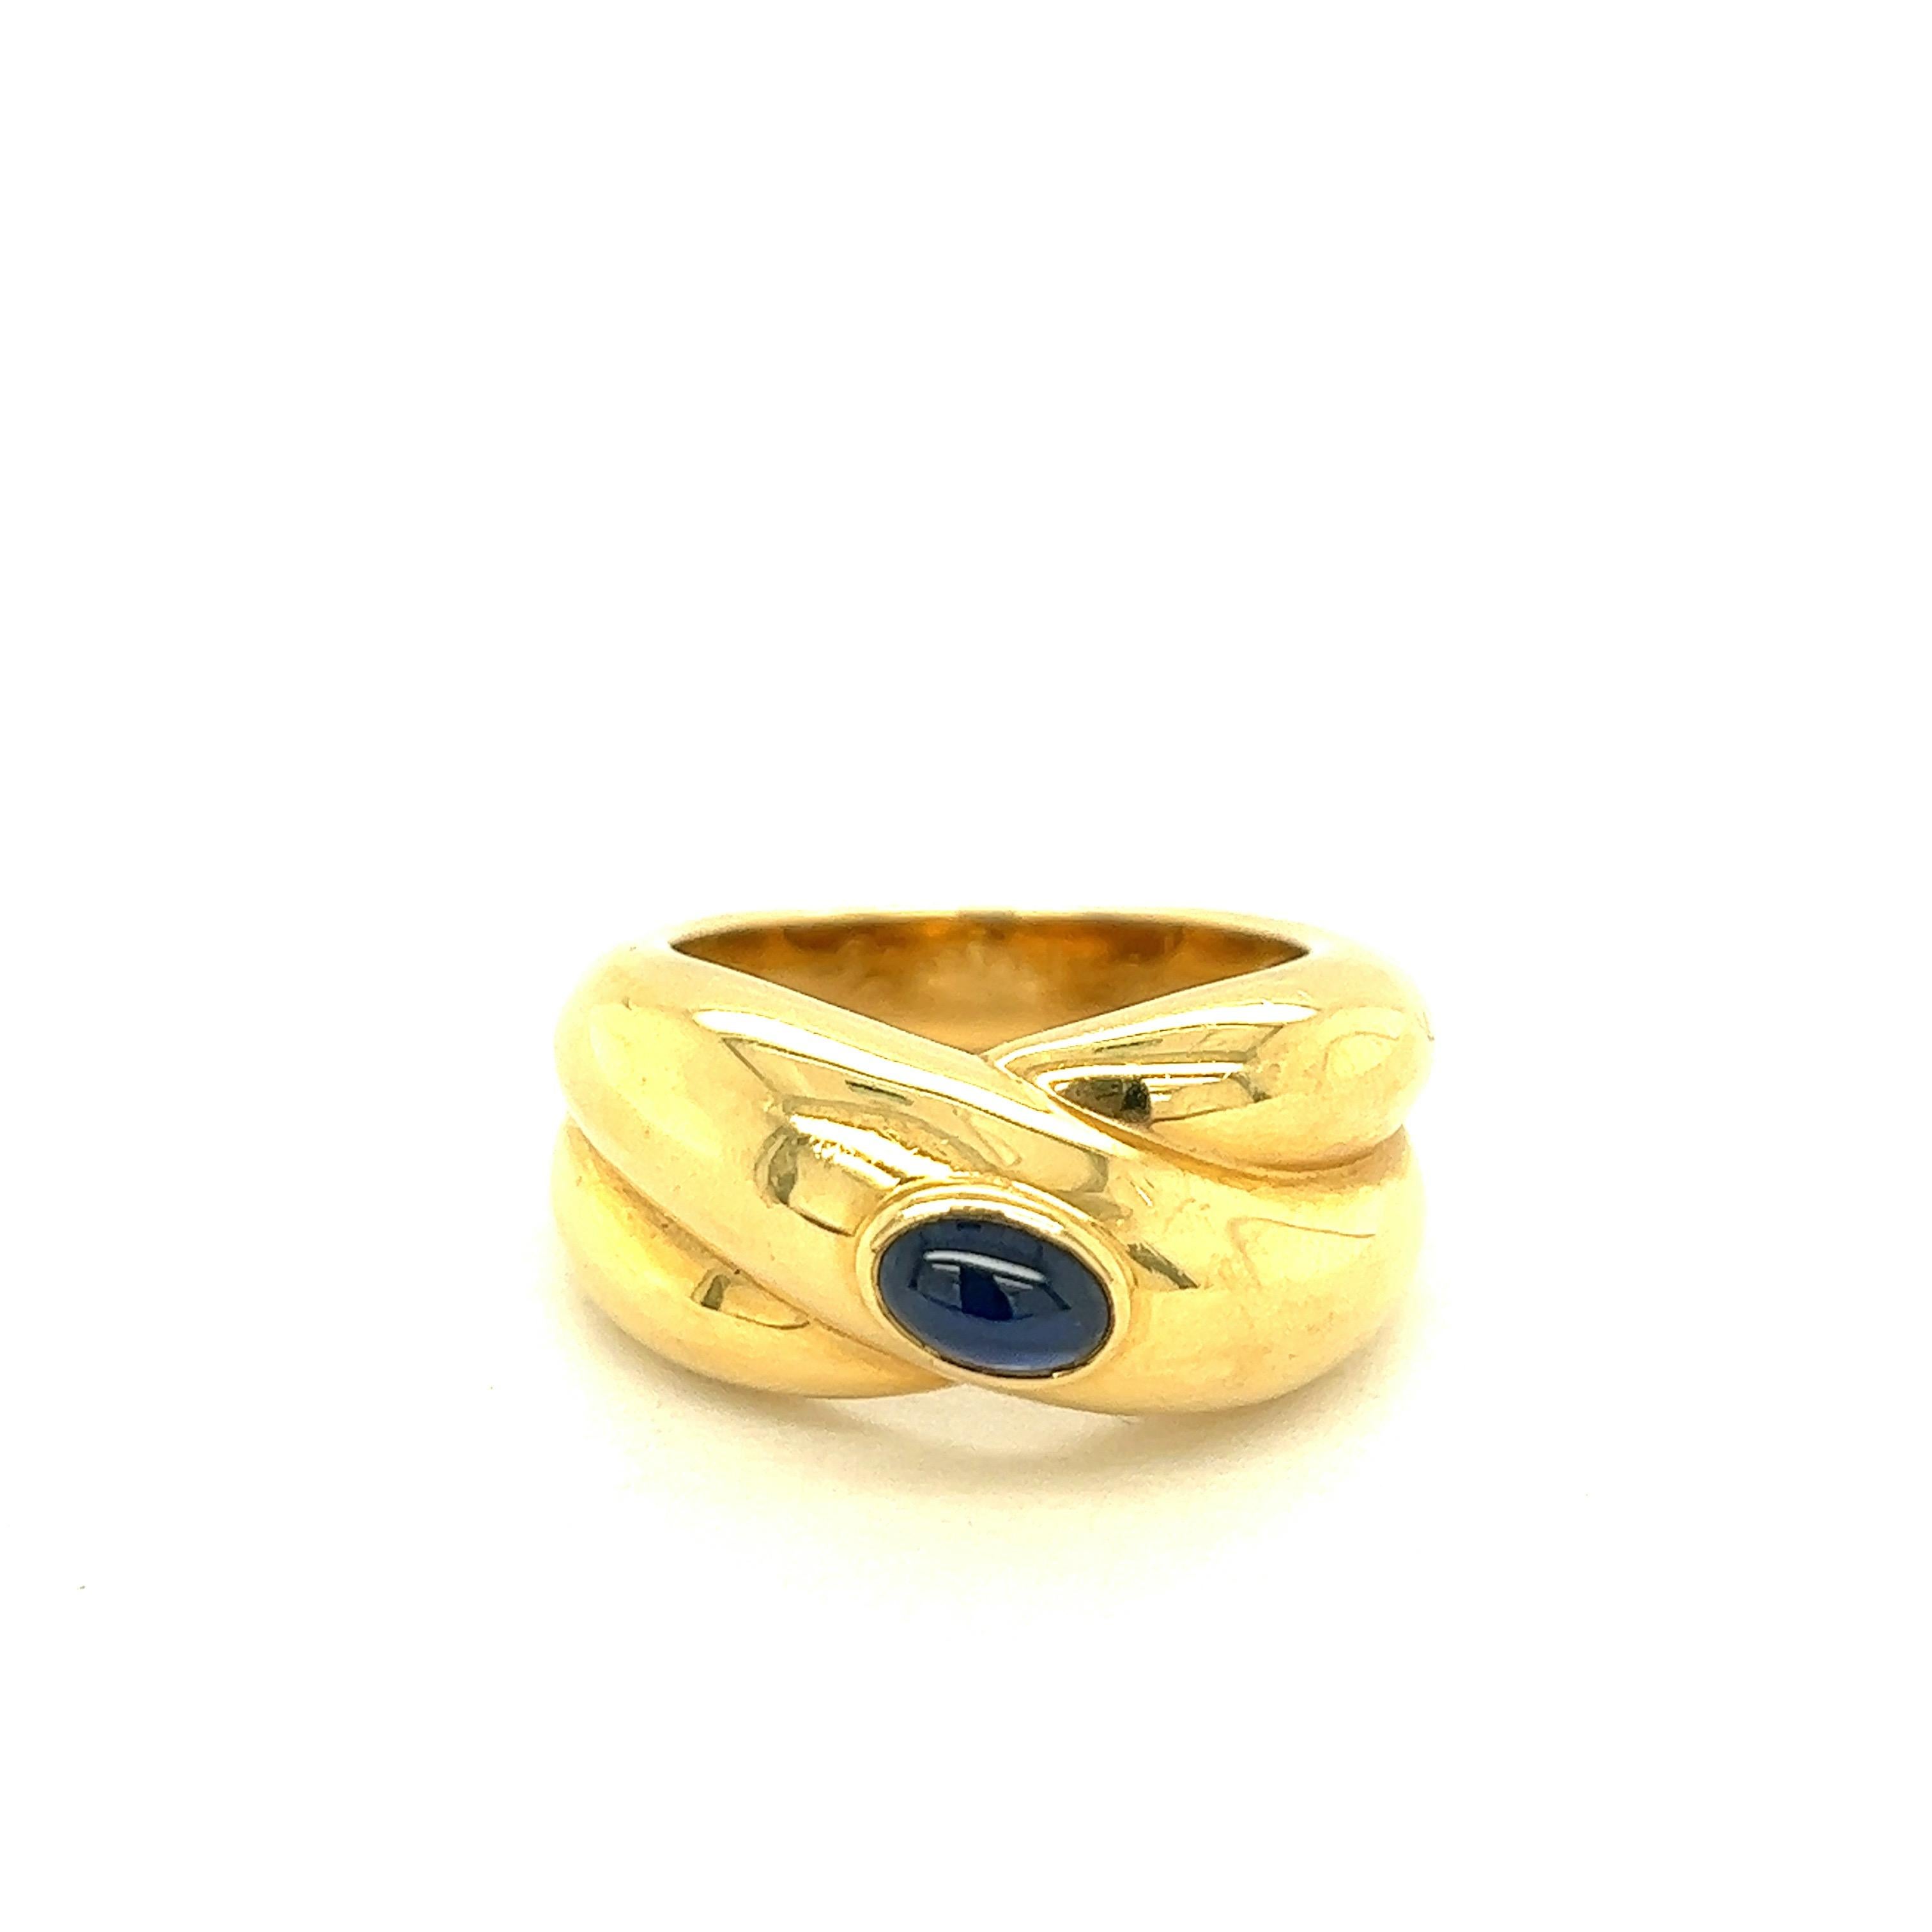 Cartier Cabochon Sapphire 18k Yellow Gold Ring, 1992

Center stone of cabochon bezel-set sapphire (3.4 x 5.4 mm) of approximately 0.30 carat, set on 18 karat yellow gold; marked Cartier, Cartier 1992, 54, 750, B42150

Ring's top width 11 mm

Size: